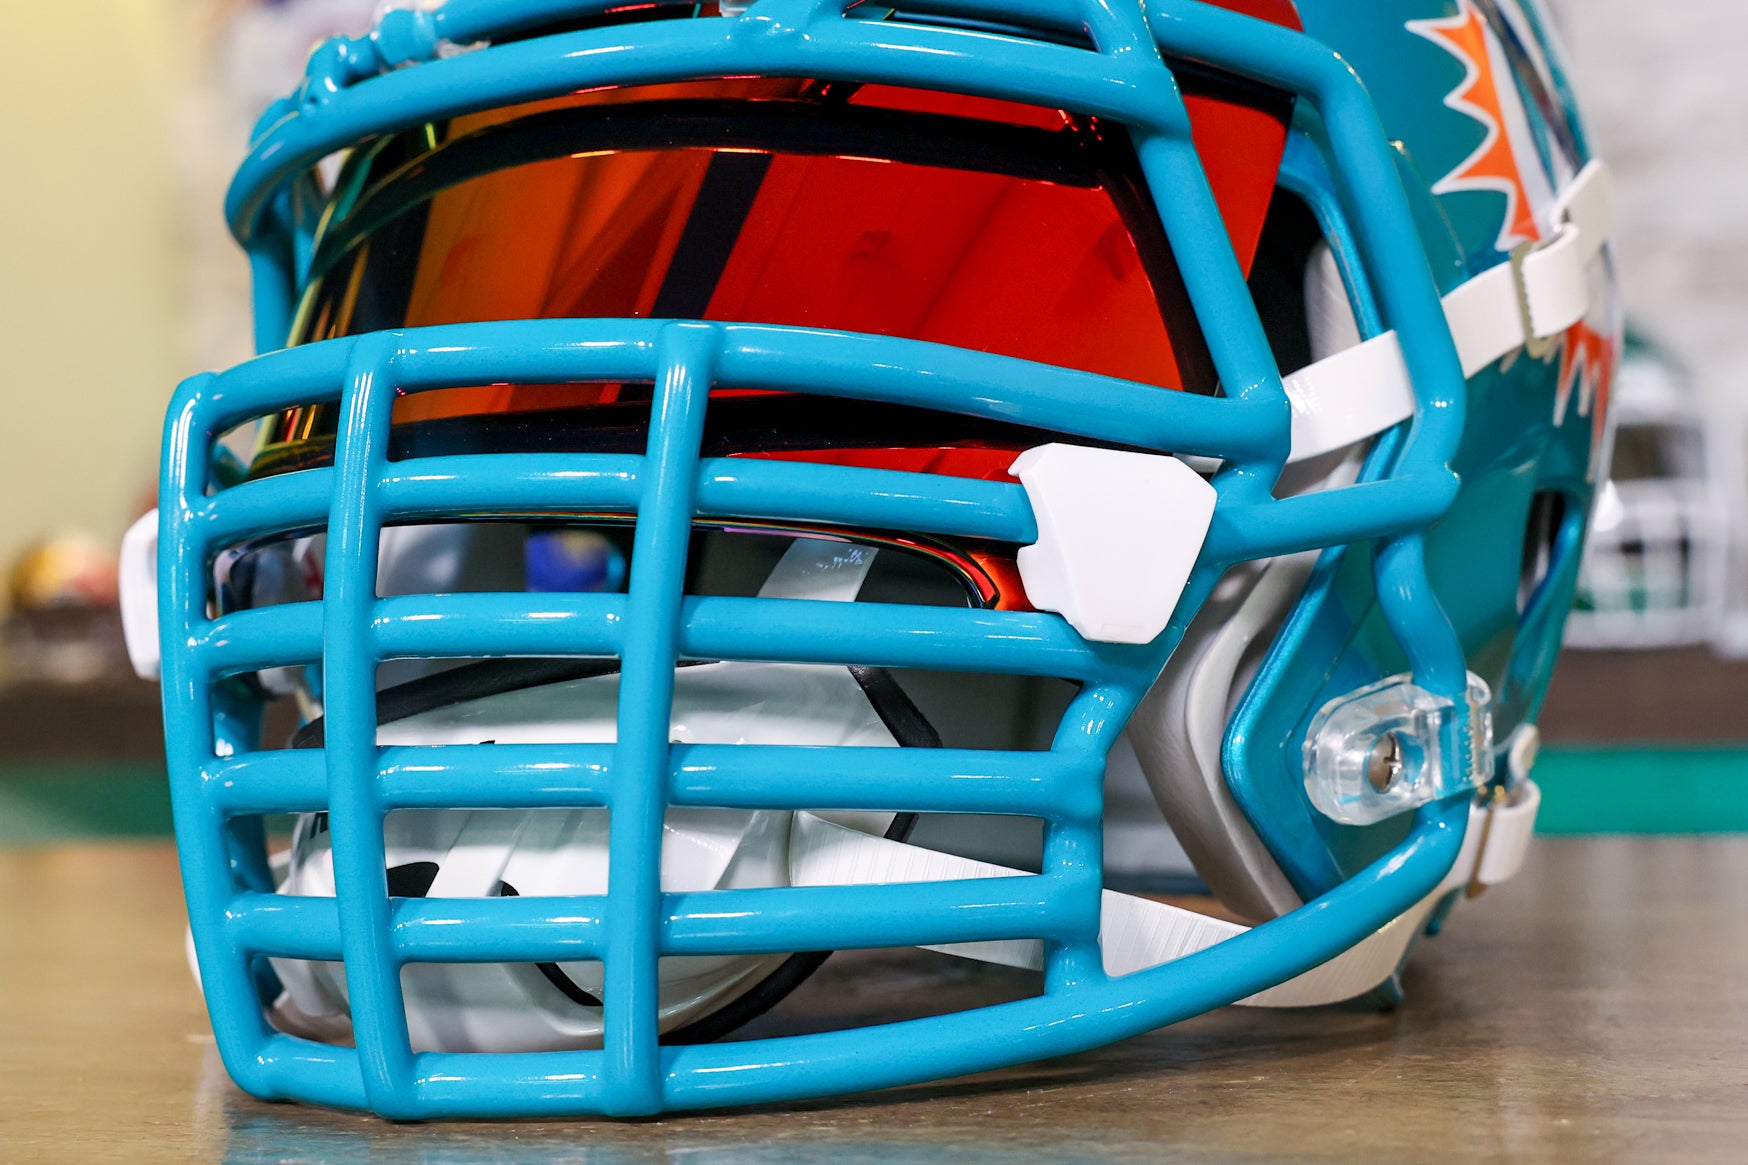 Miami Dolphins Riddell Speed Authentic Helmet - GG Edition